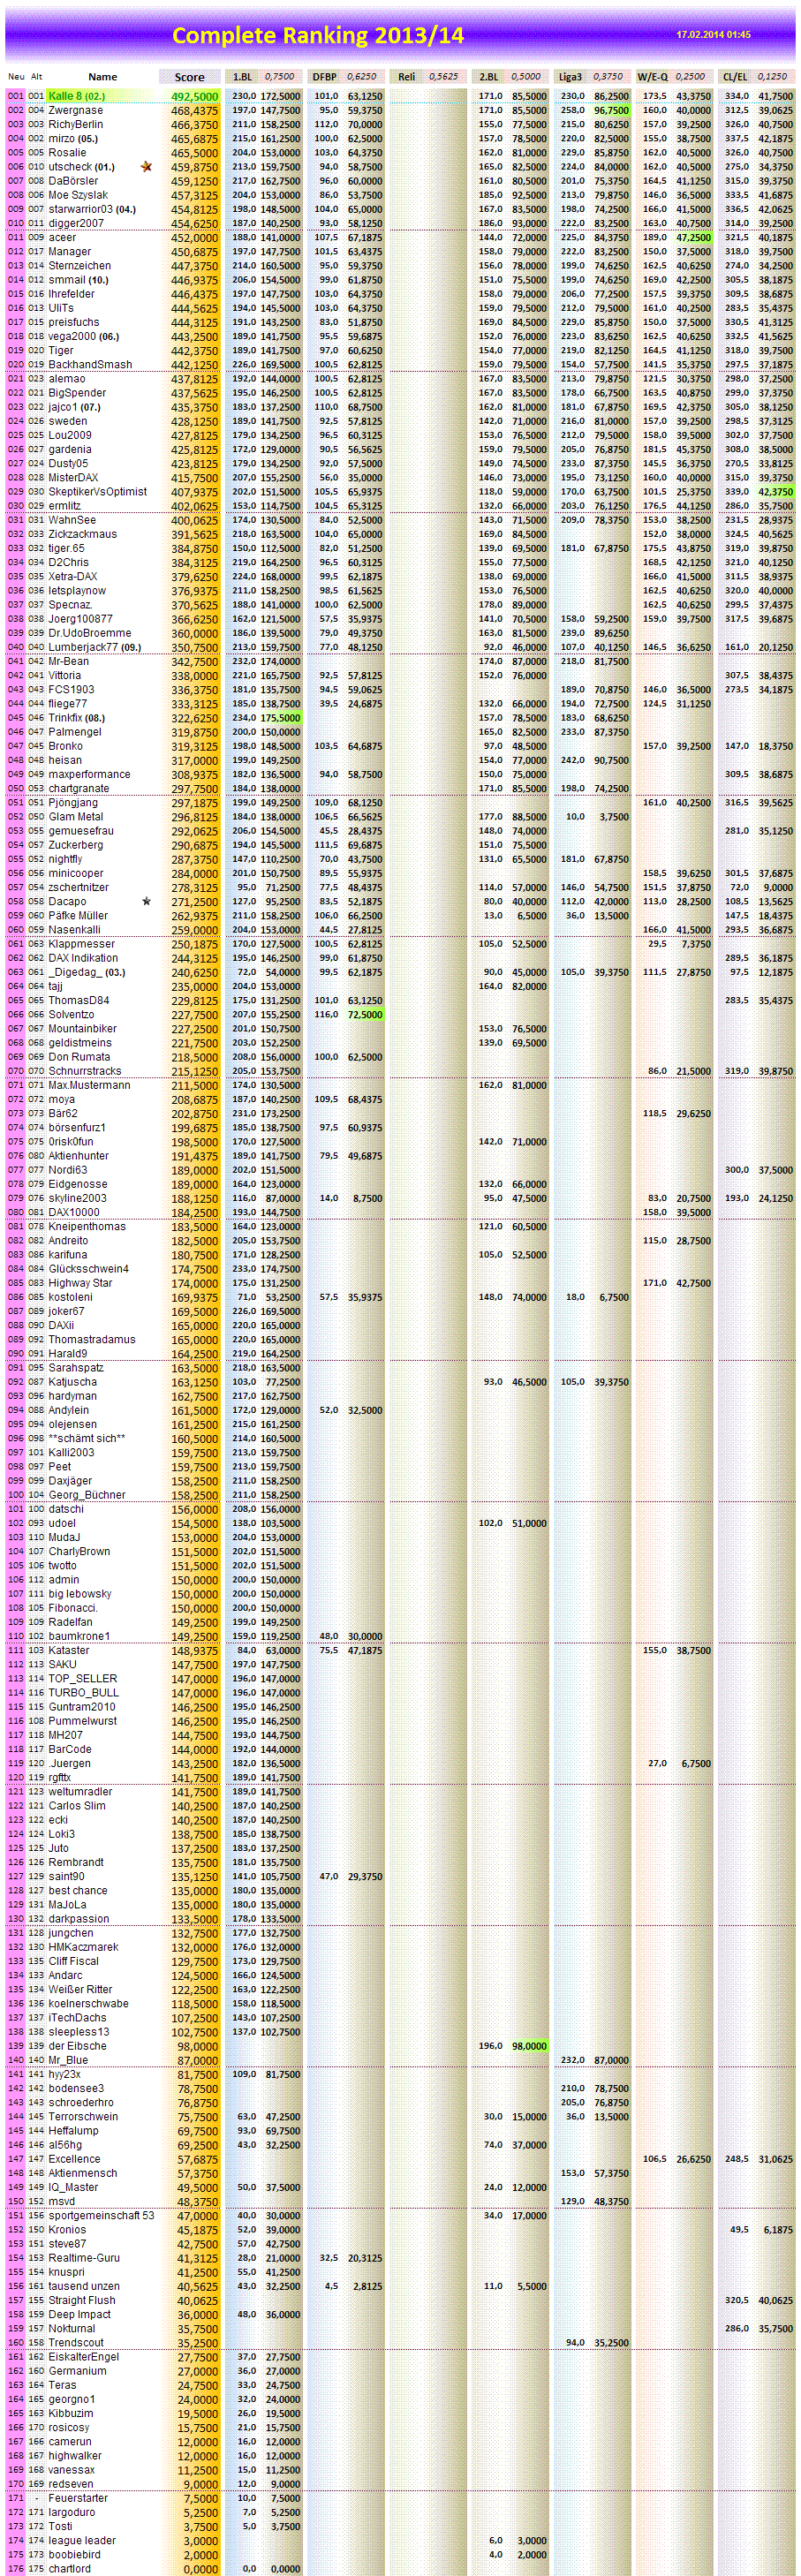 completeranking2013-14.png